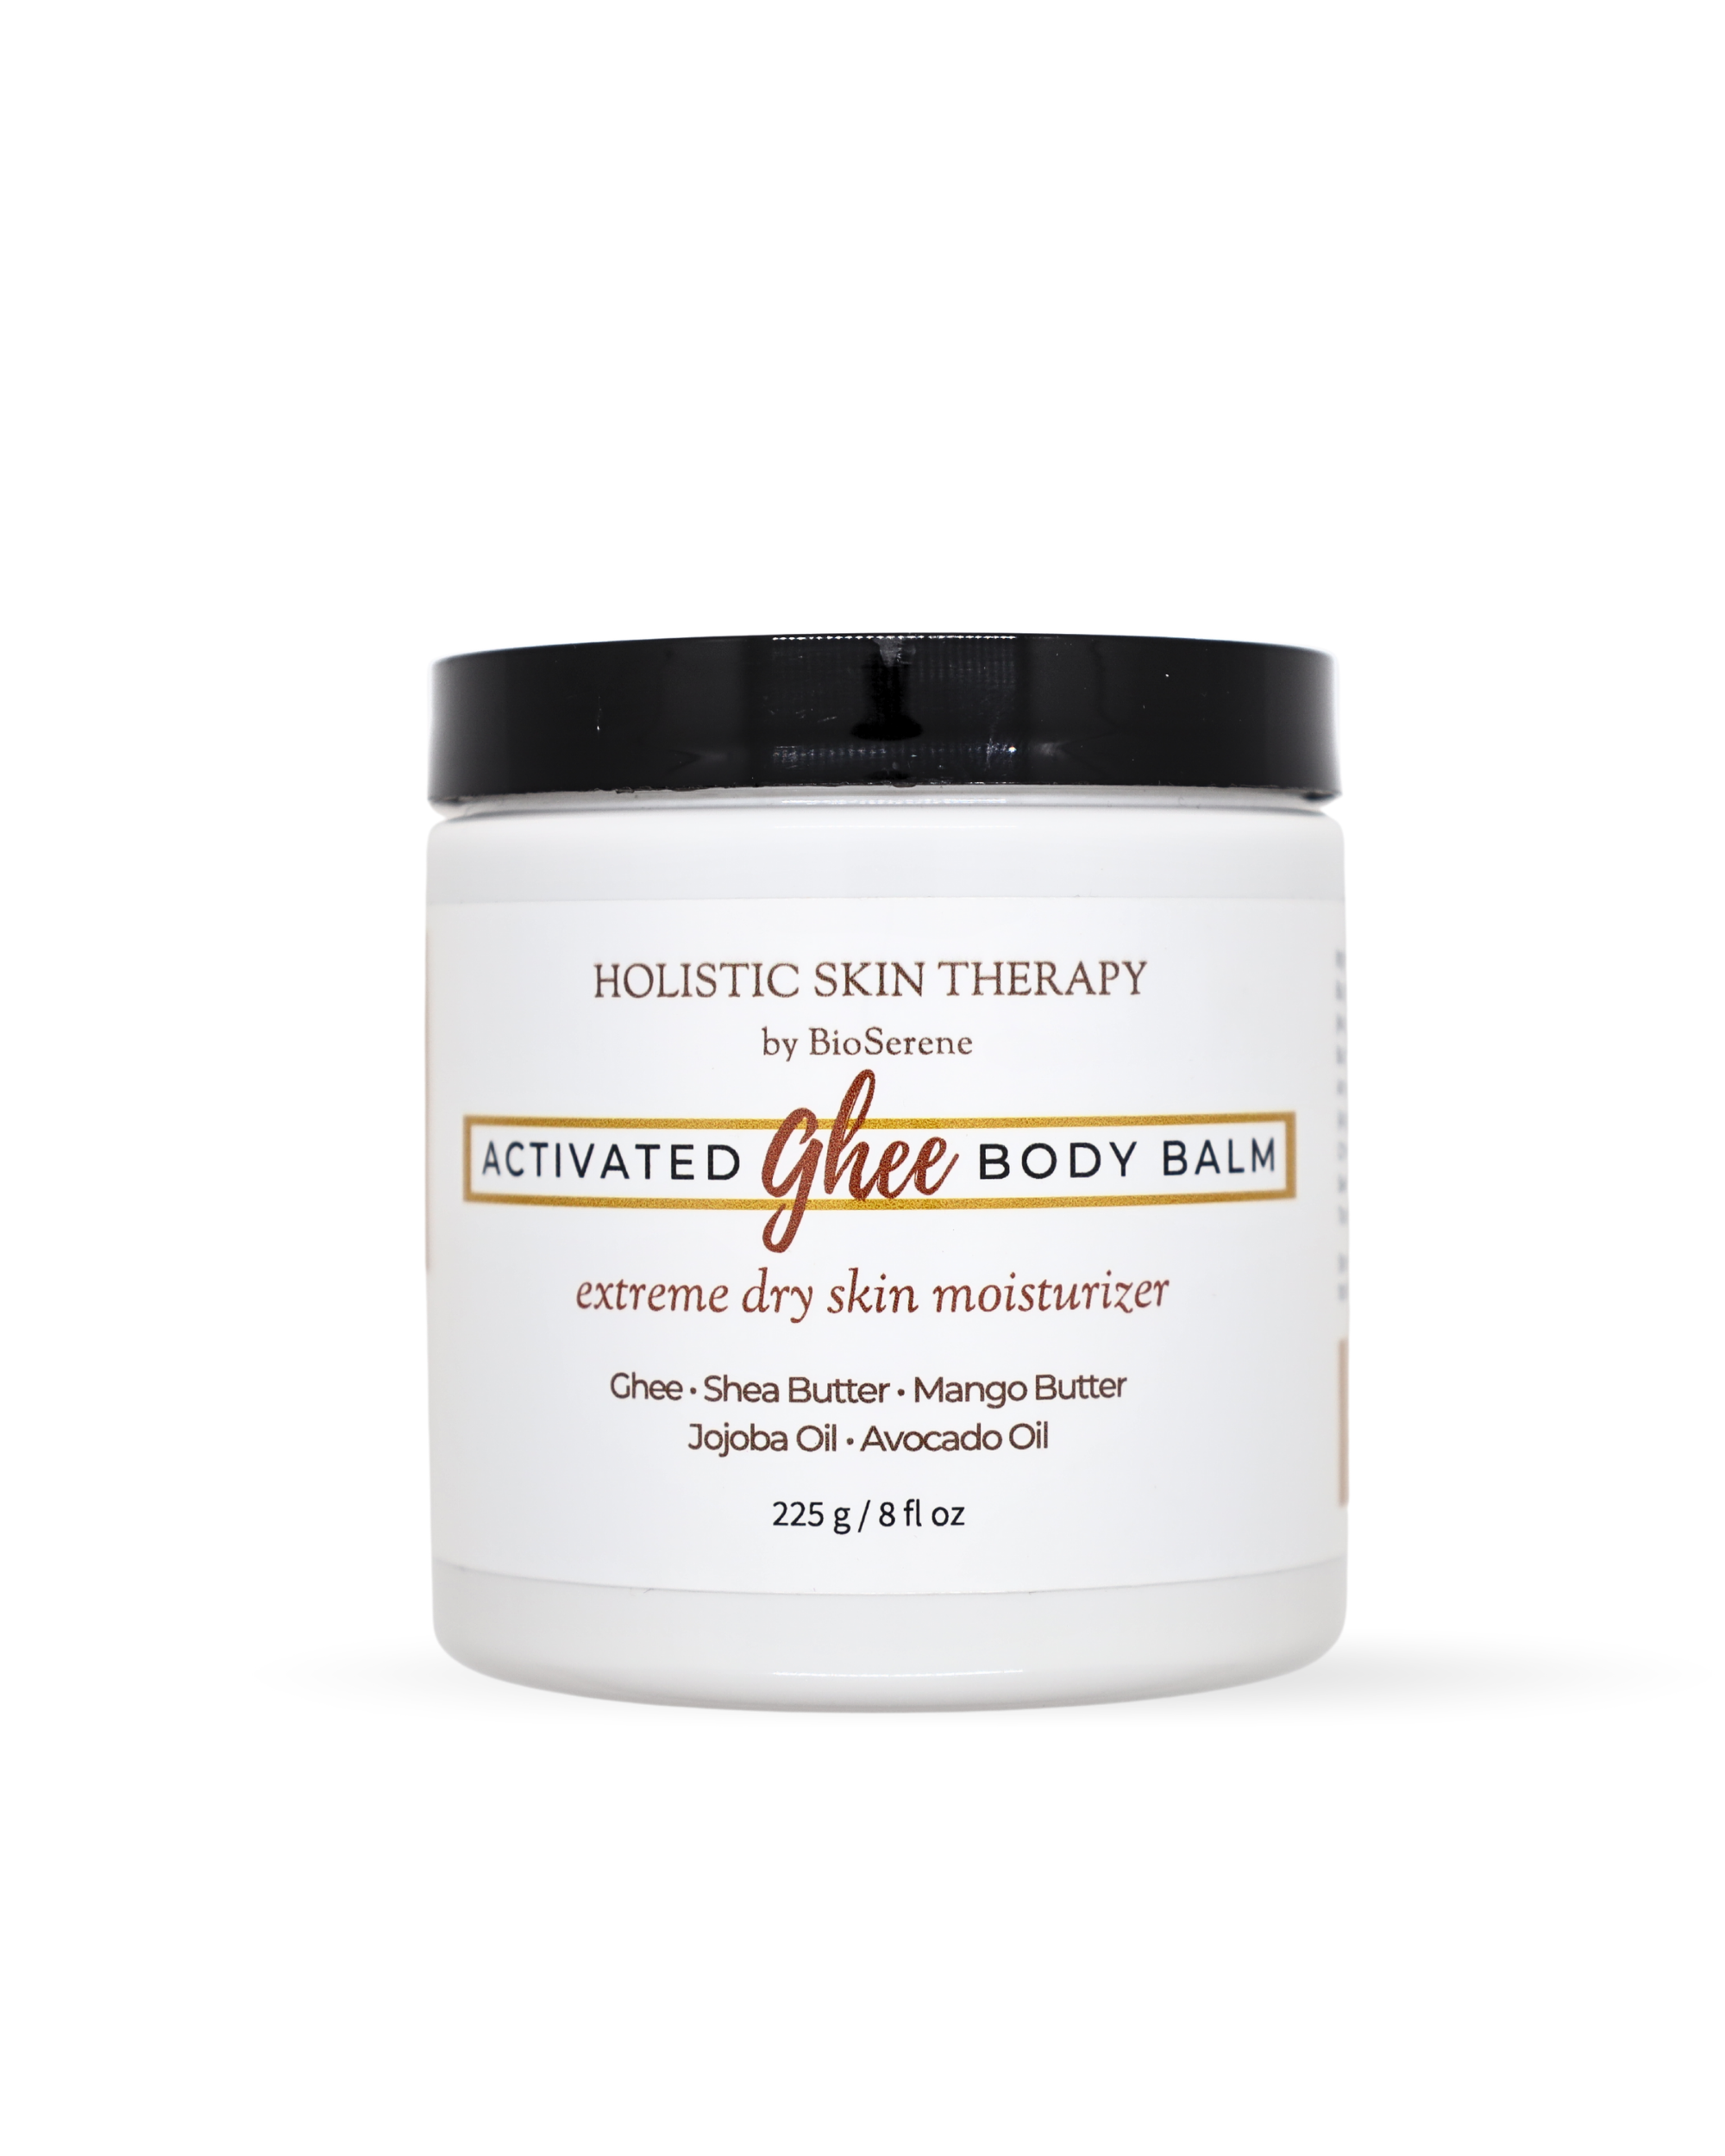 Activated Ghee Body Balm - Extra Dry Skin Moisturizer